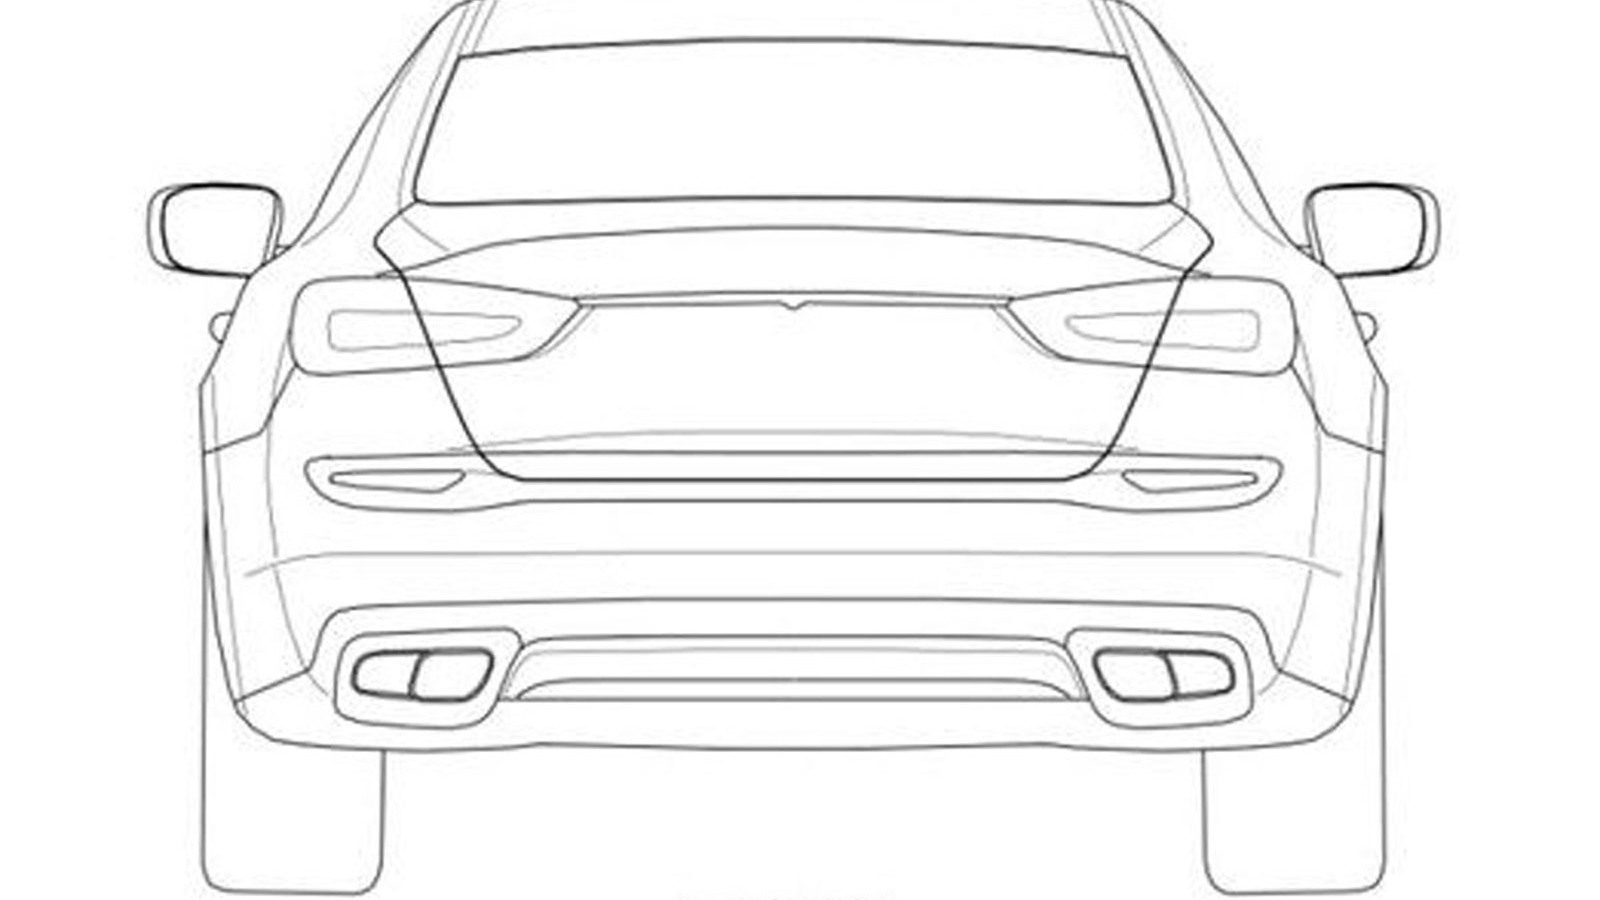 Alleged patent drawings for 2014 Maserati Quattroporte